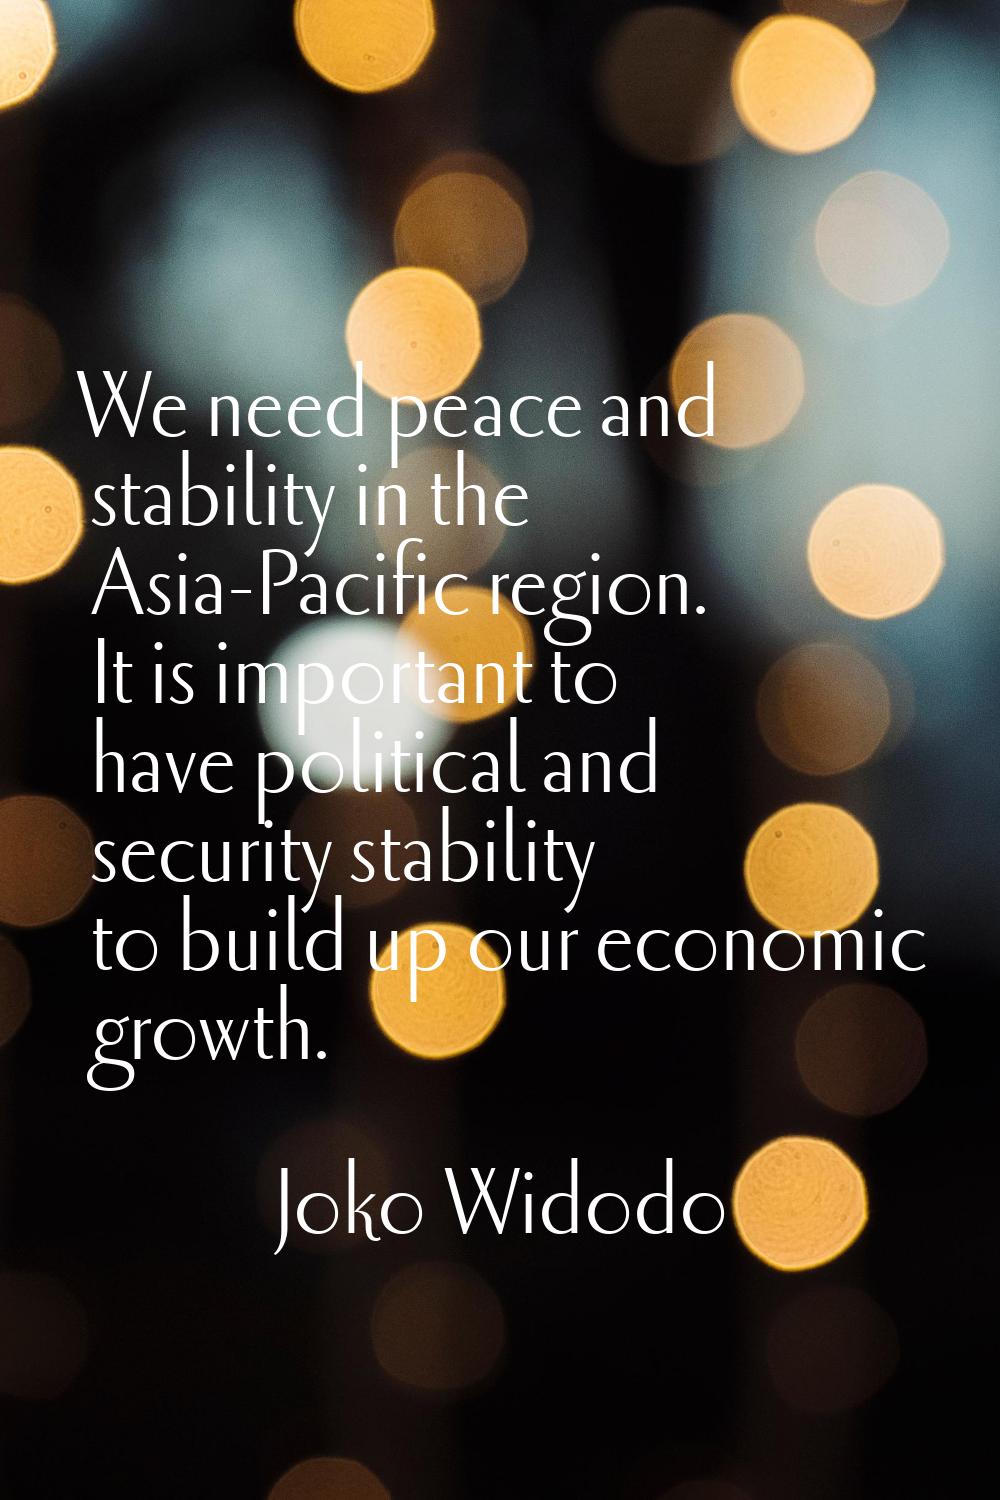 We need peace and stability in the Asia-Pacific region. It is important to have political and secur